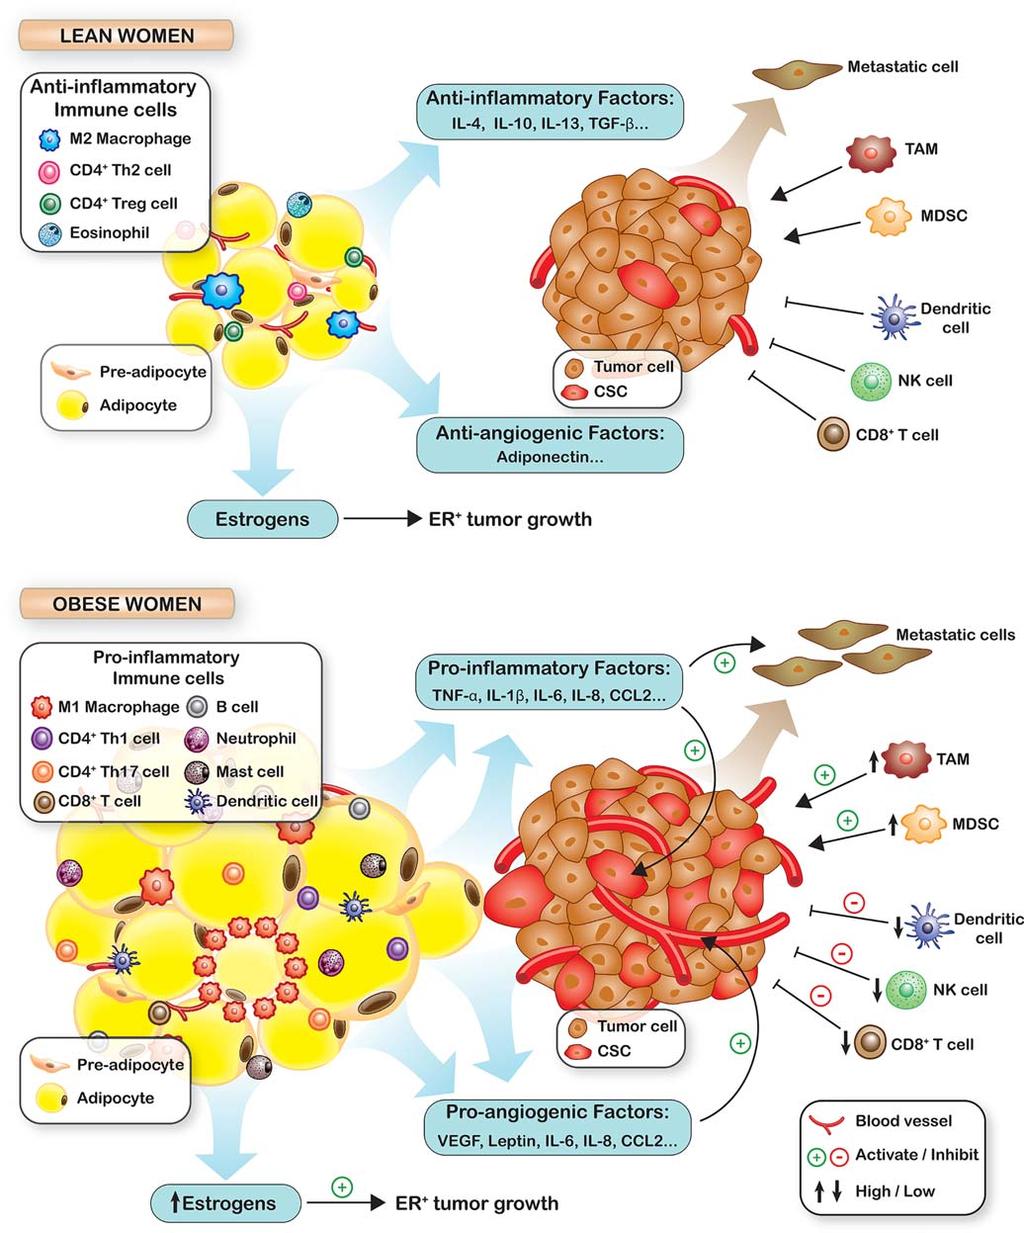 Breast Cancer, Inflammation, and Obesity FIGURE 5. The Role of Obesity in Tumorigenesis.